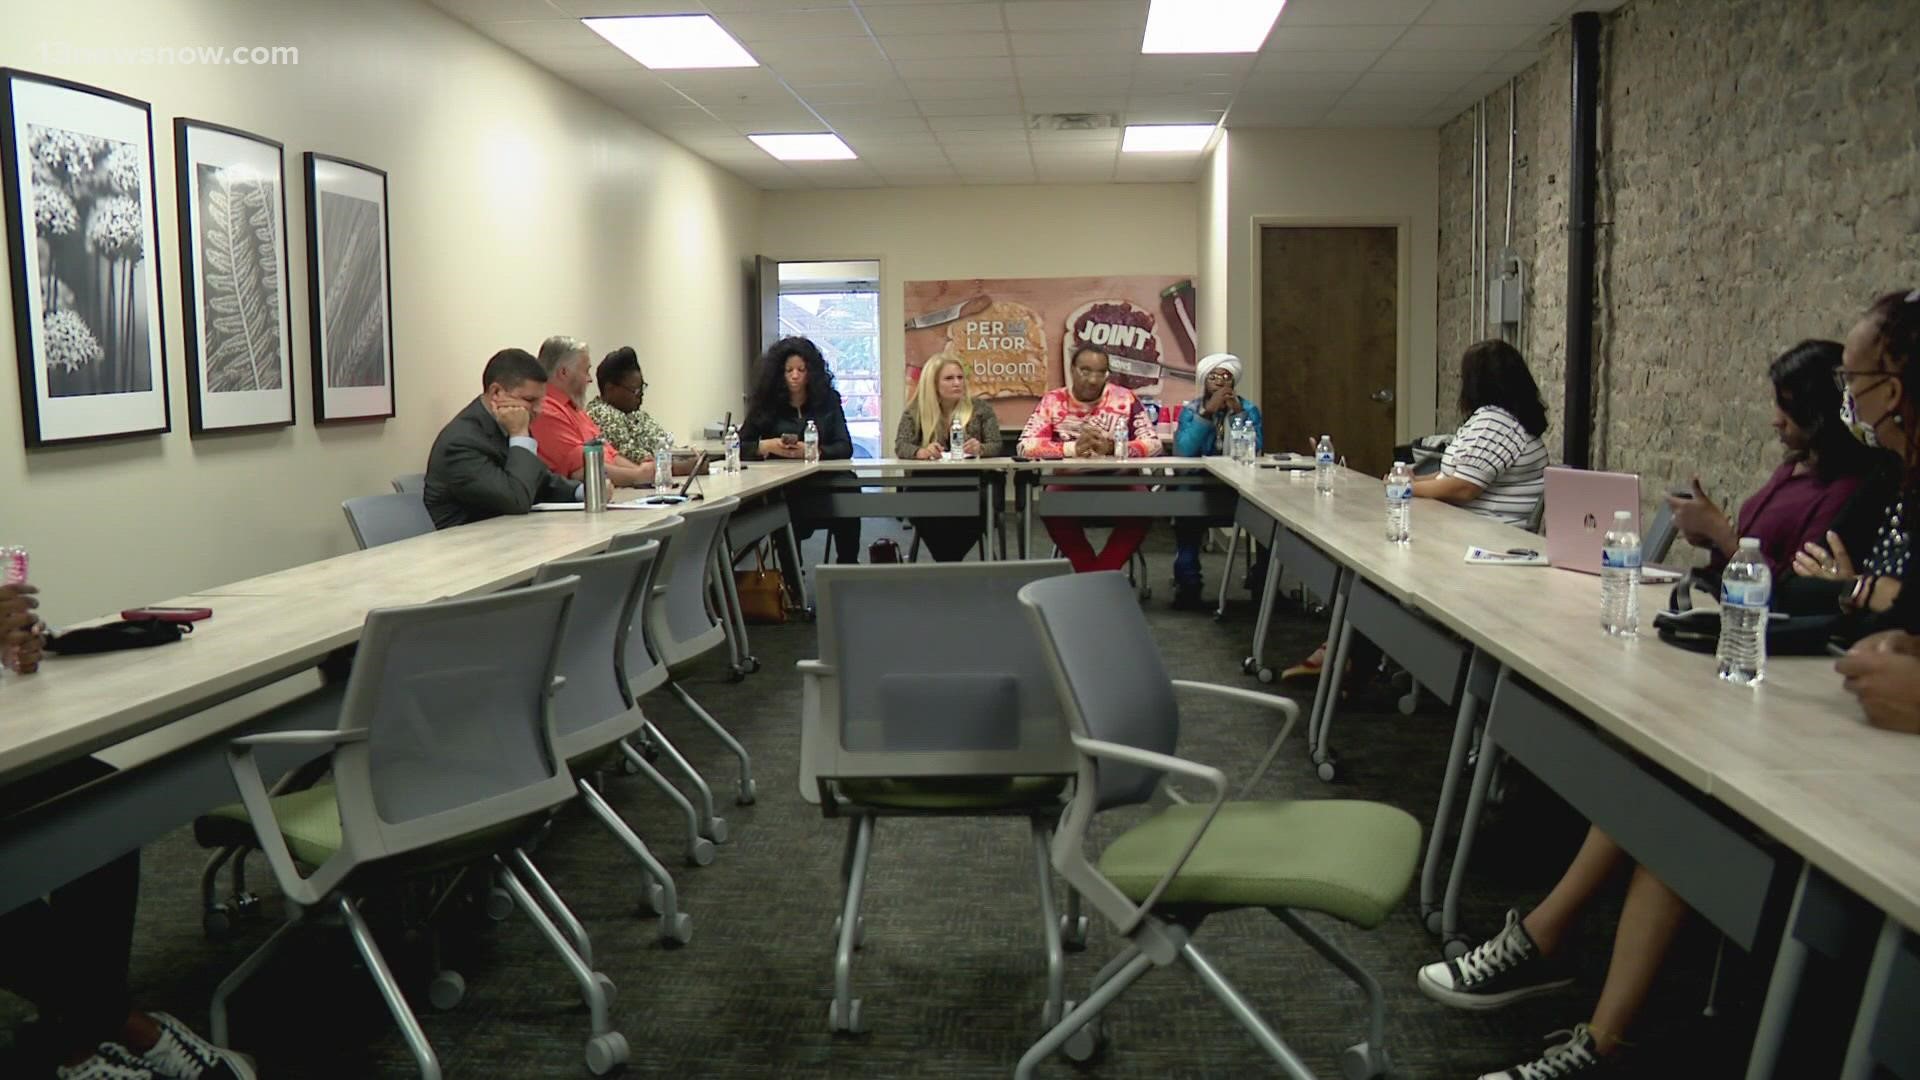 The faith leaders wanted to discuss what the community can do to stop the violence.